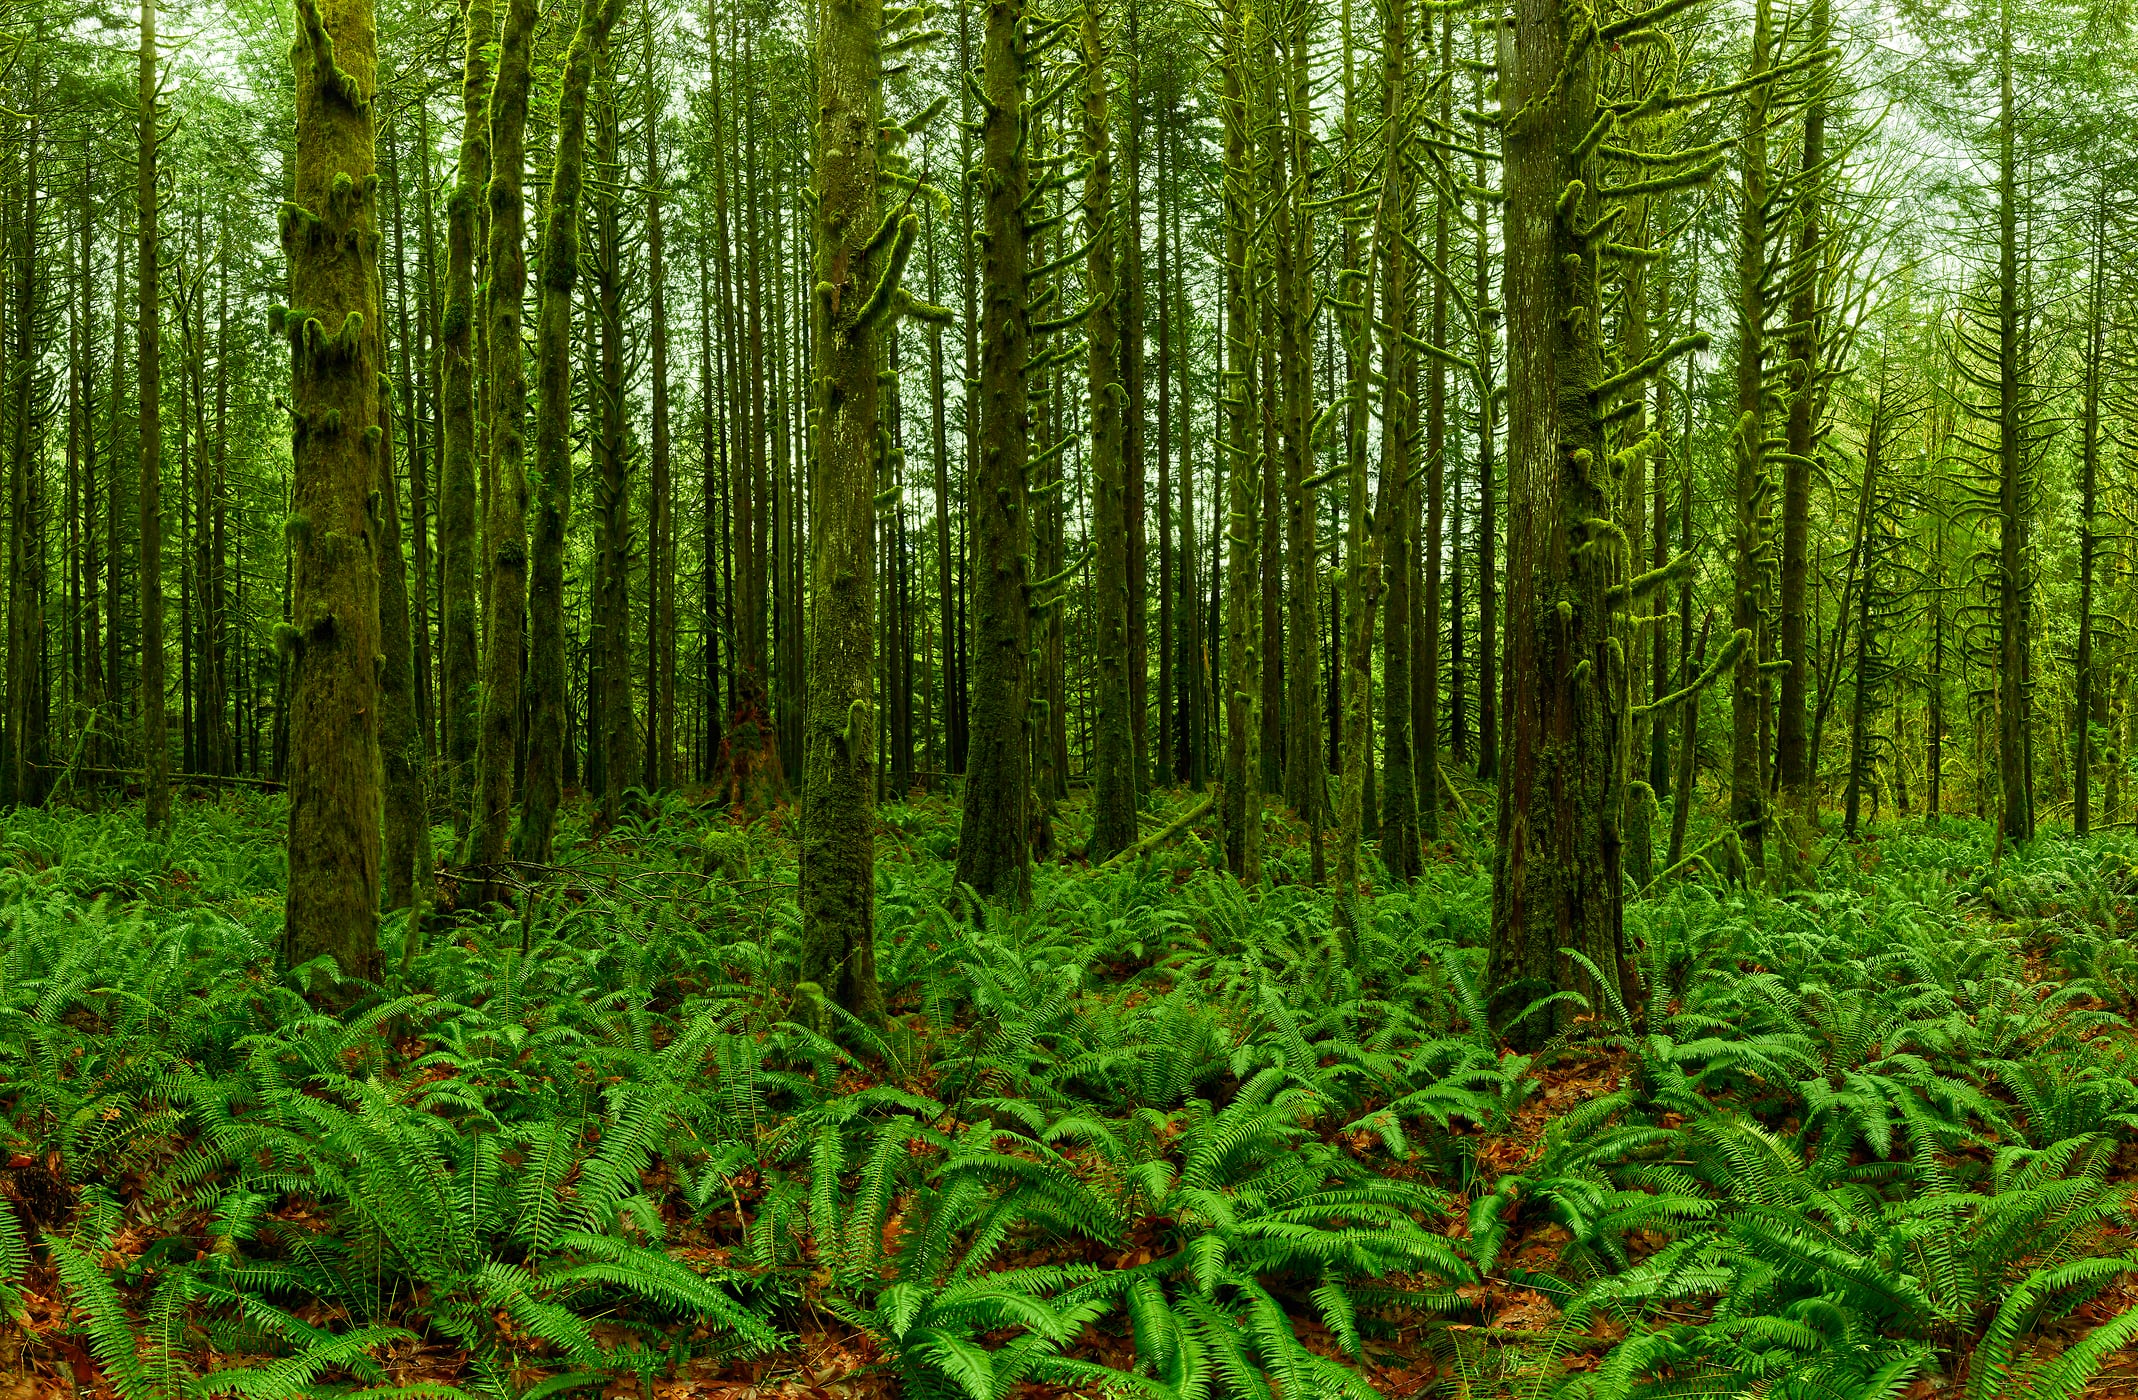 425 megapixels! A very high resolution, large-format VAST photo print of a forest with many ferns on the ground; nature photograph created by Chris Collacott.